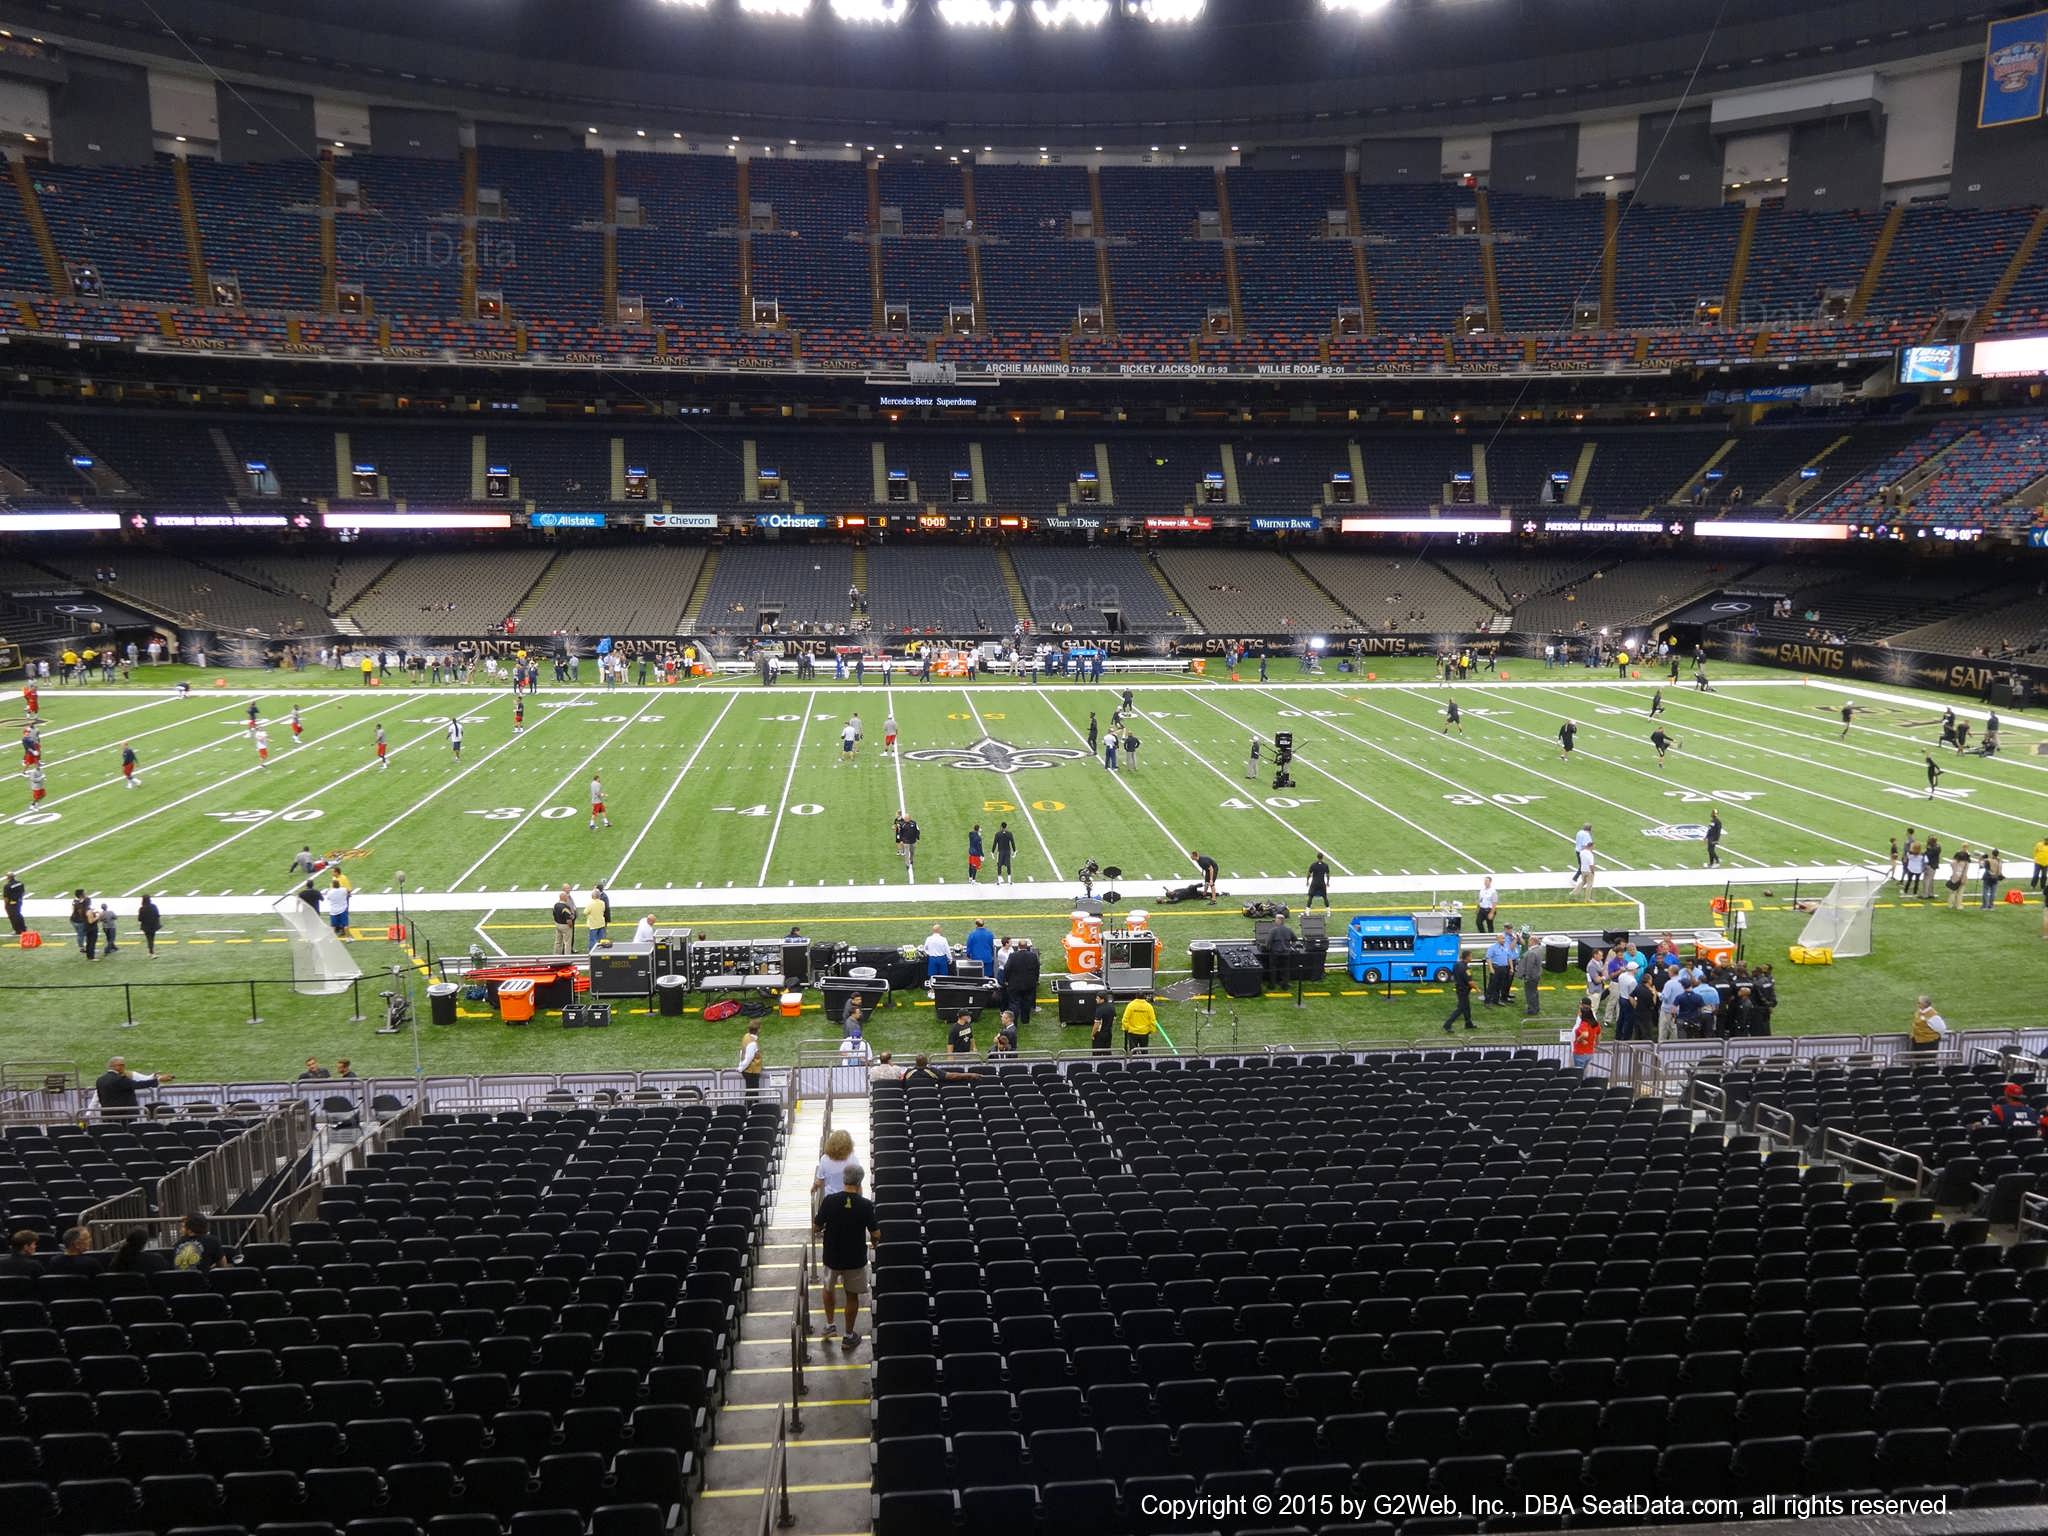 Seat view from section 265 at the Mercedes-Benz Superdome, home of the New Orleans Saints